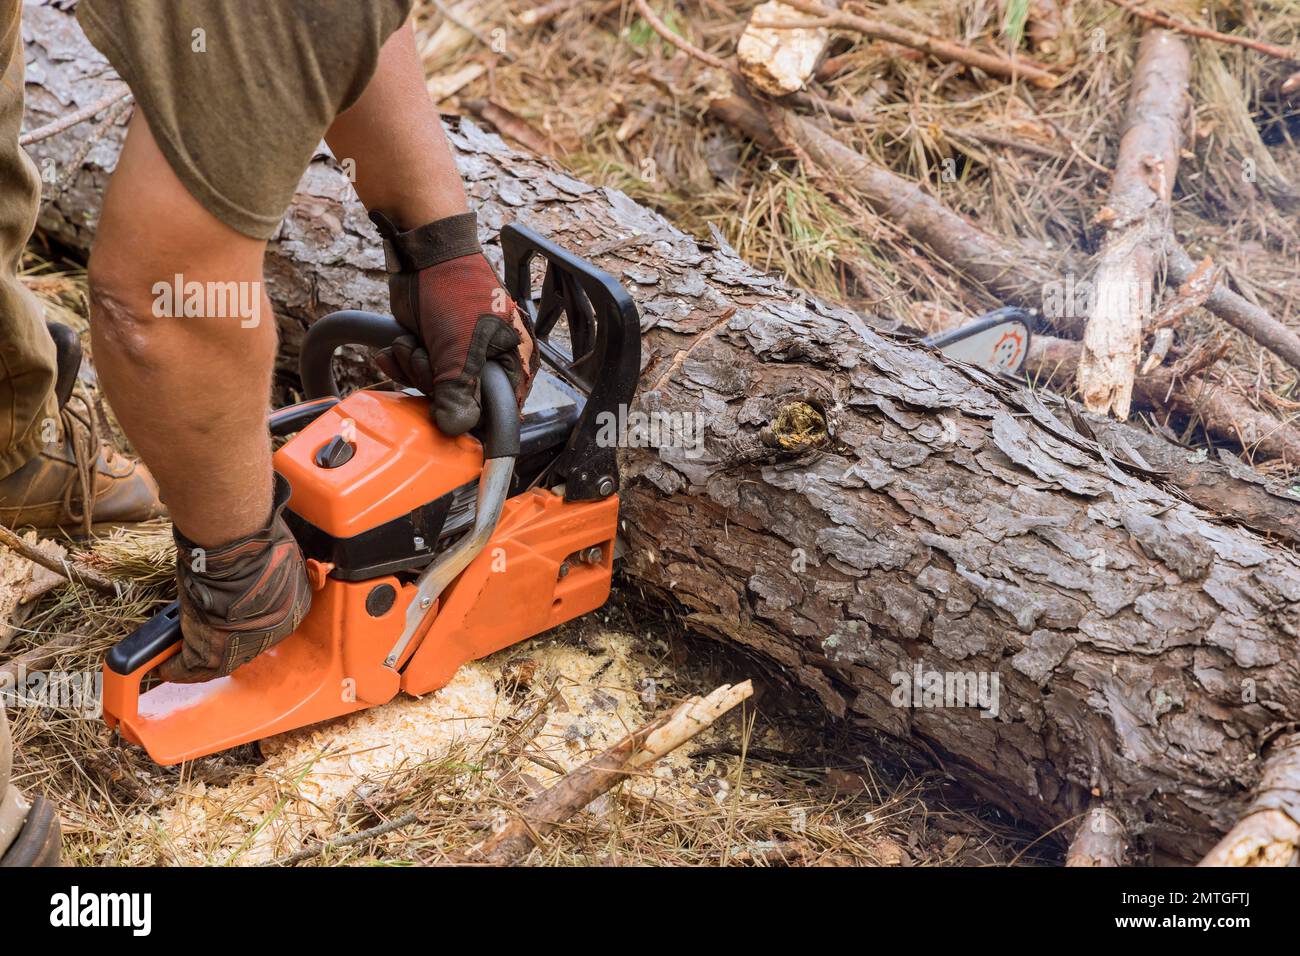 In process of cutting down trees an employee is using chainsaw to cut trees this resulted in destruction forest as result of activity. Stock Photo